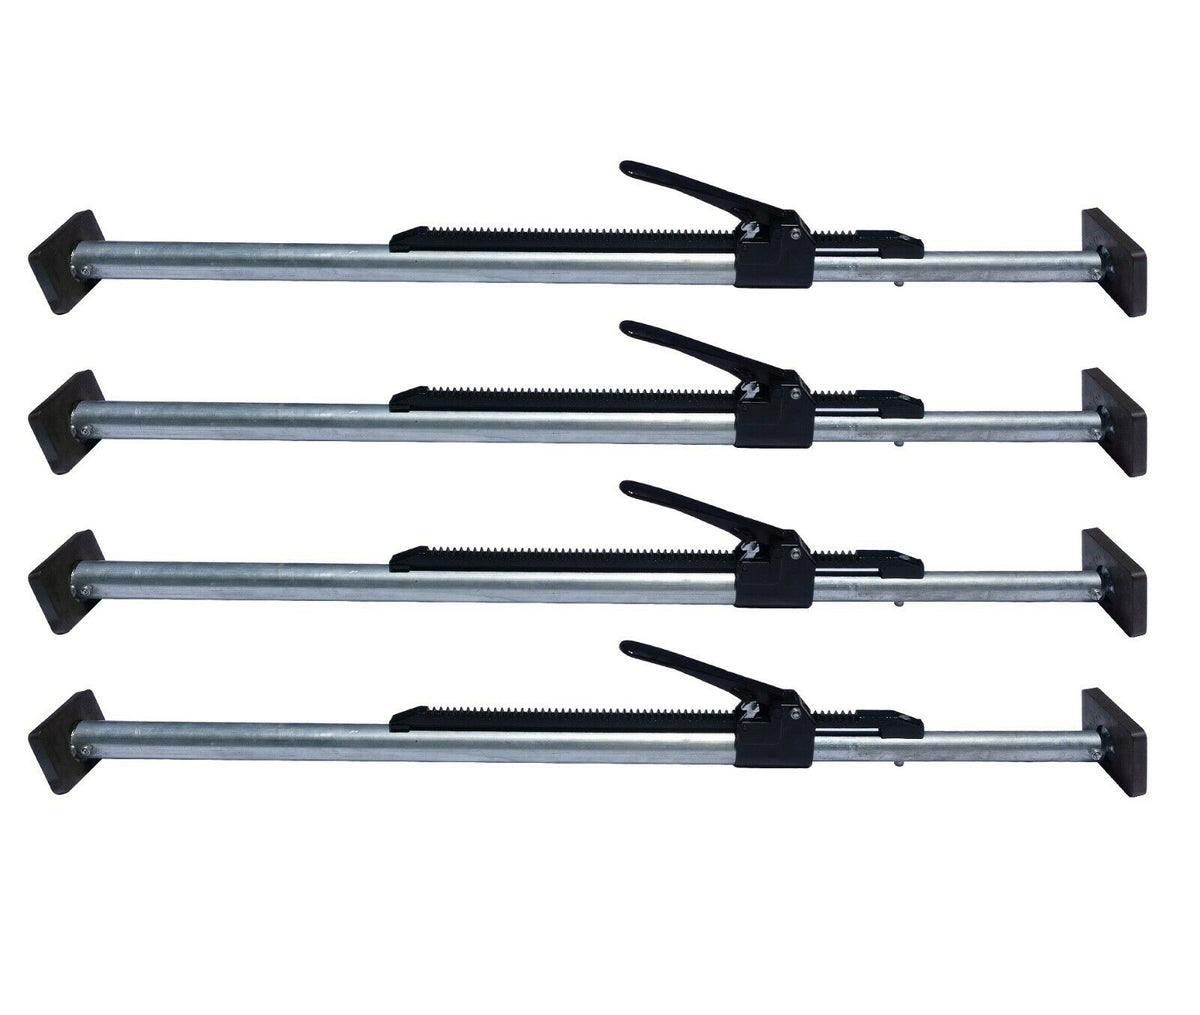 4 Pack 89.5”-104” Cargo Load Bar for Enclosed Trucks and Semi Trailers